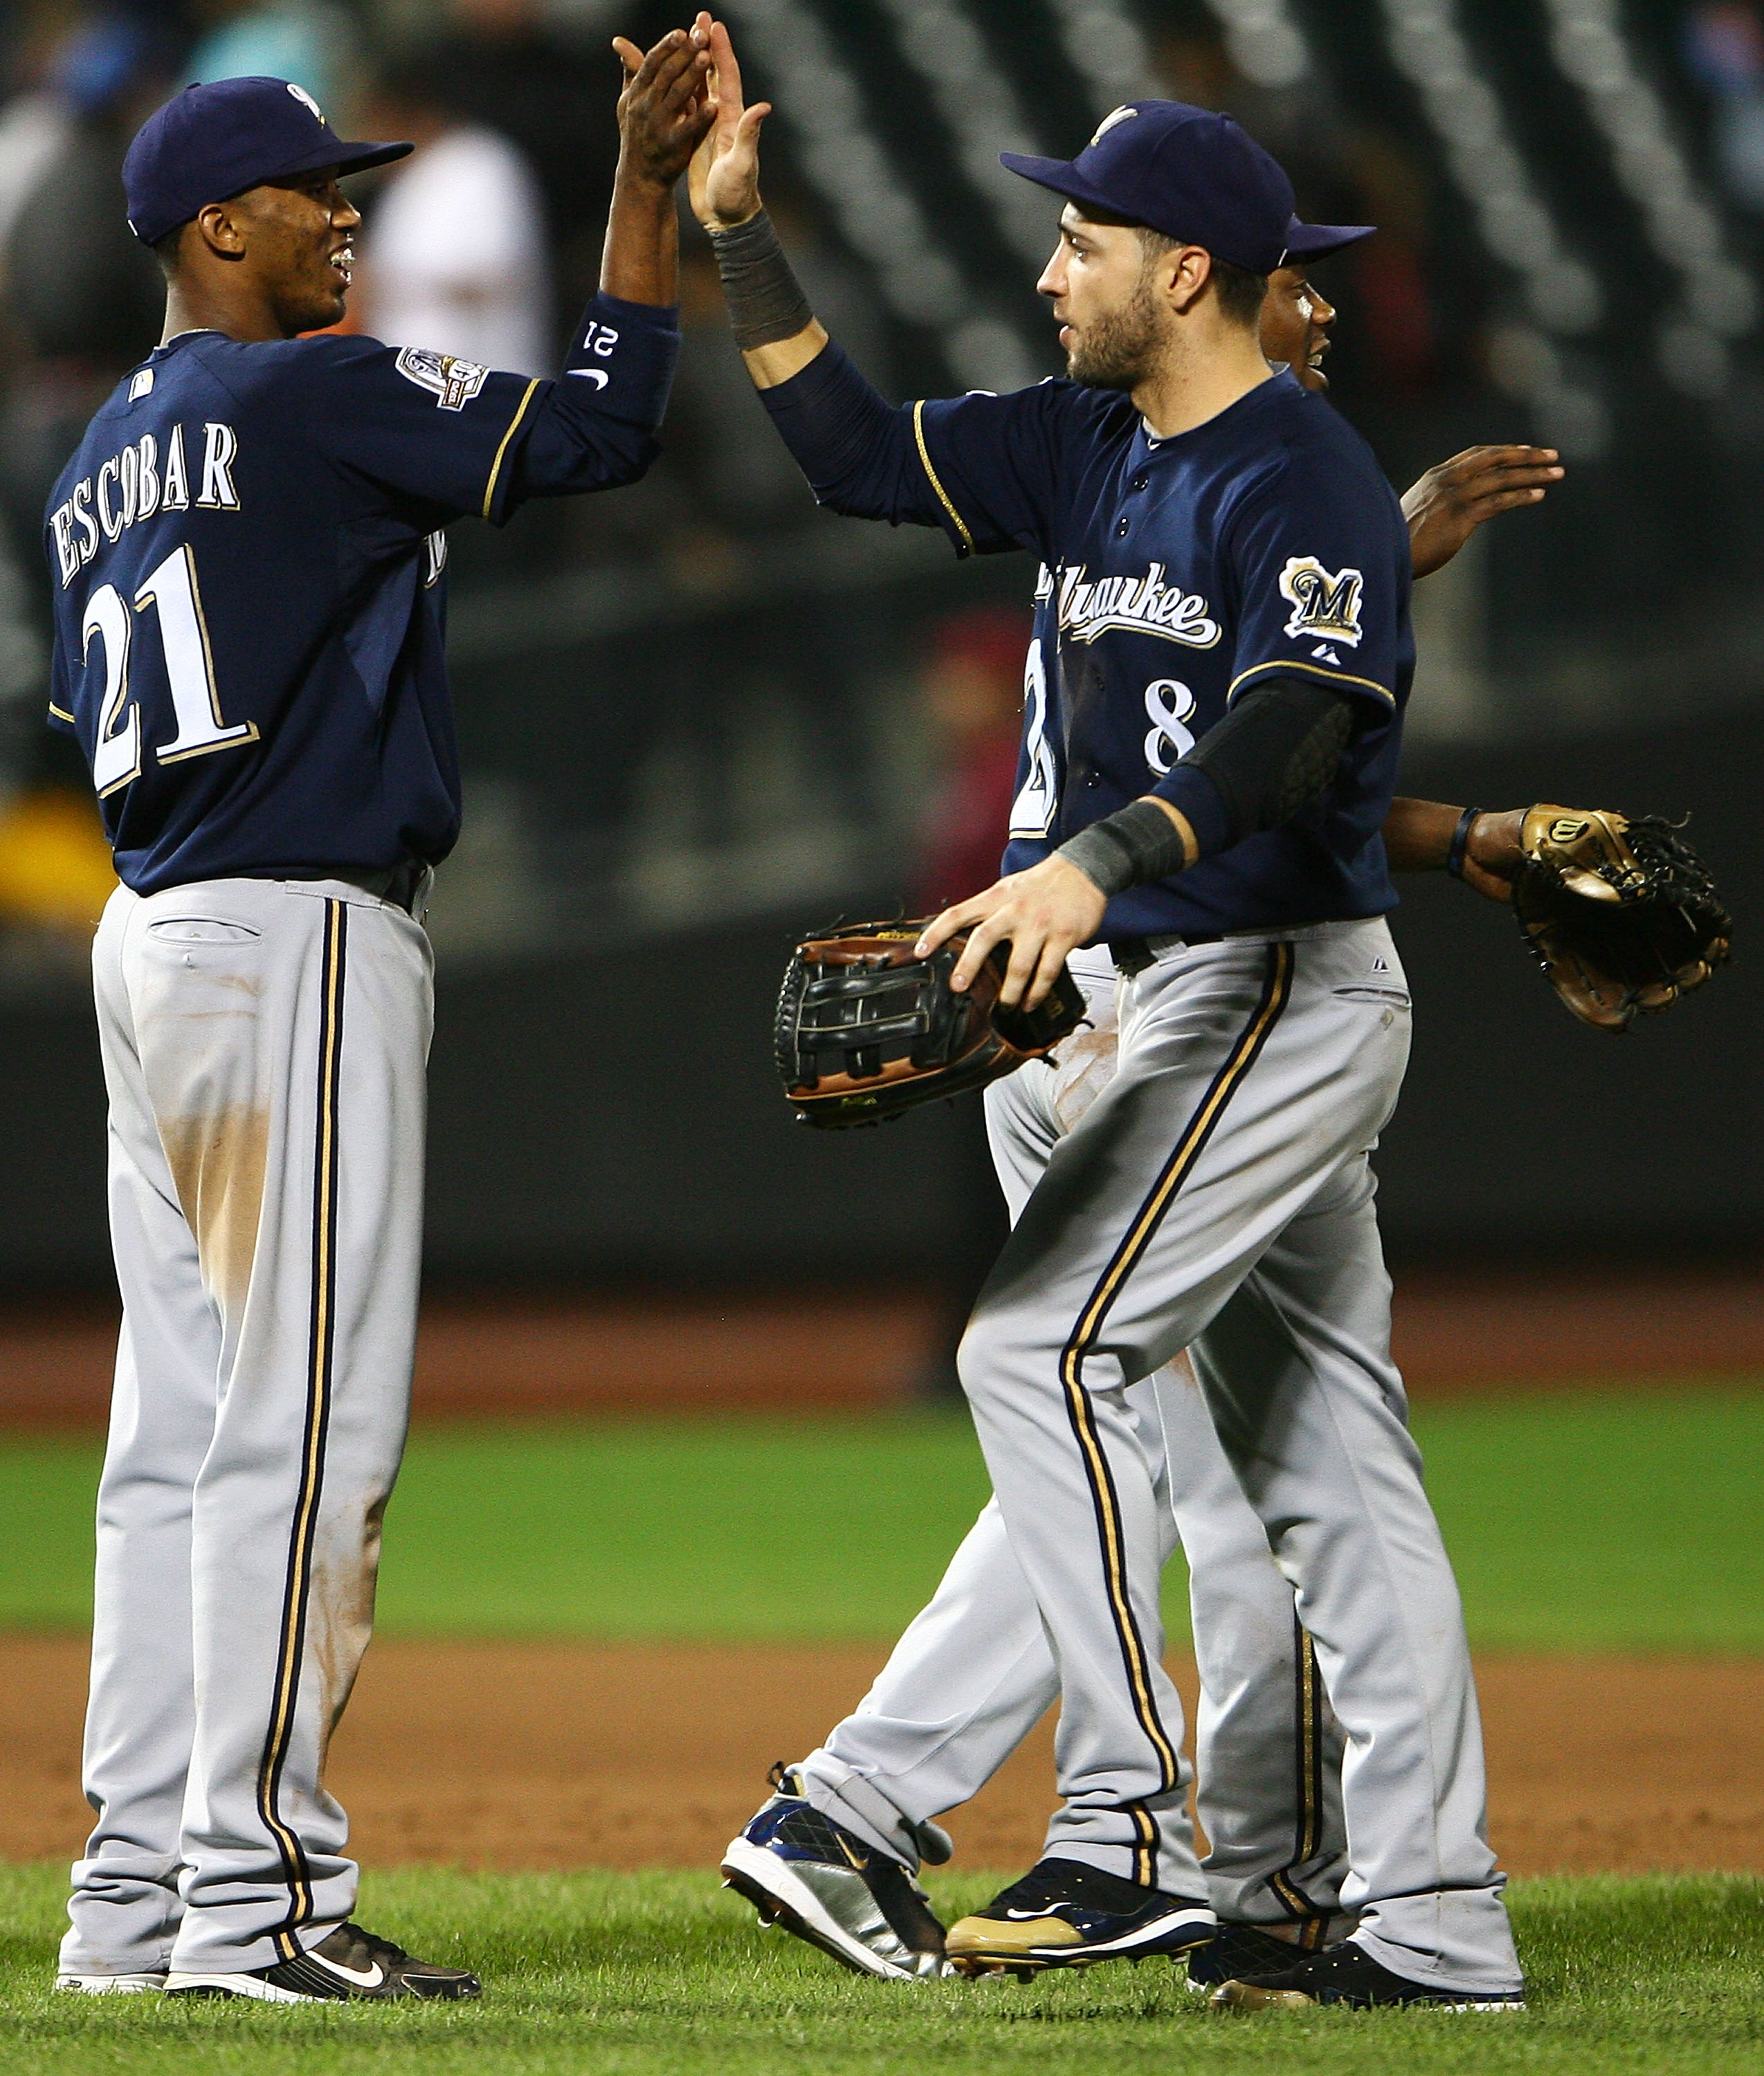 NEW YORK - SEPTEMBER 30:  Alcides Esobar #21 and Ryan Bauer #8 of the Milwaukee Brewers celebrate after beating the New York Mets 9 - 2 on September 30, 2010 at Citi Field in the Flushing neighborhood of the Queens borough of New York City. This was the f